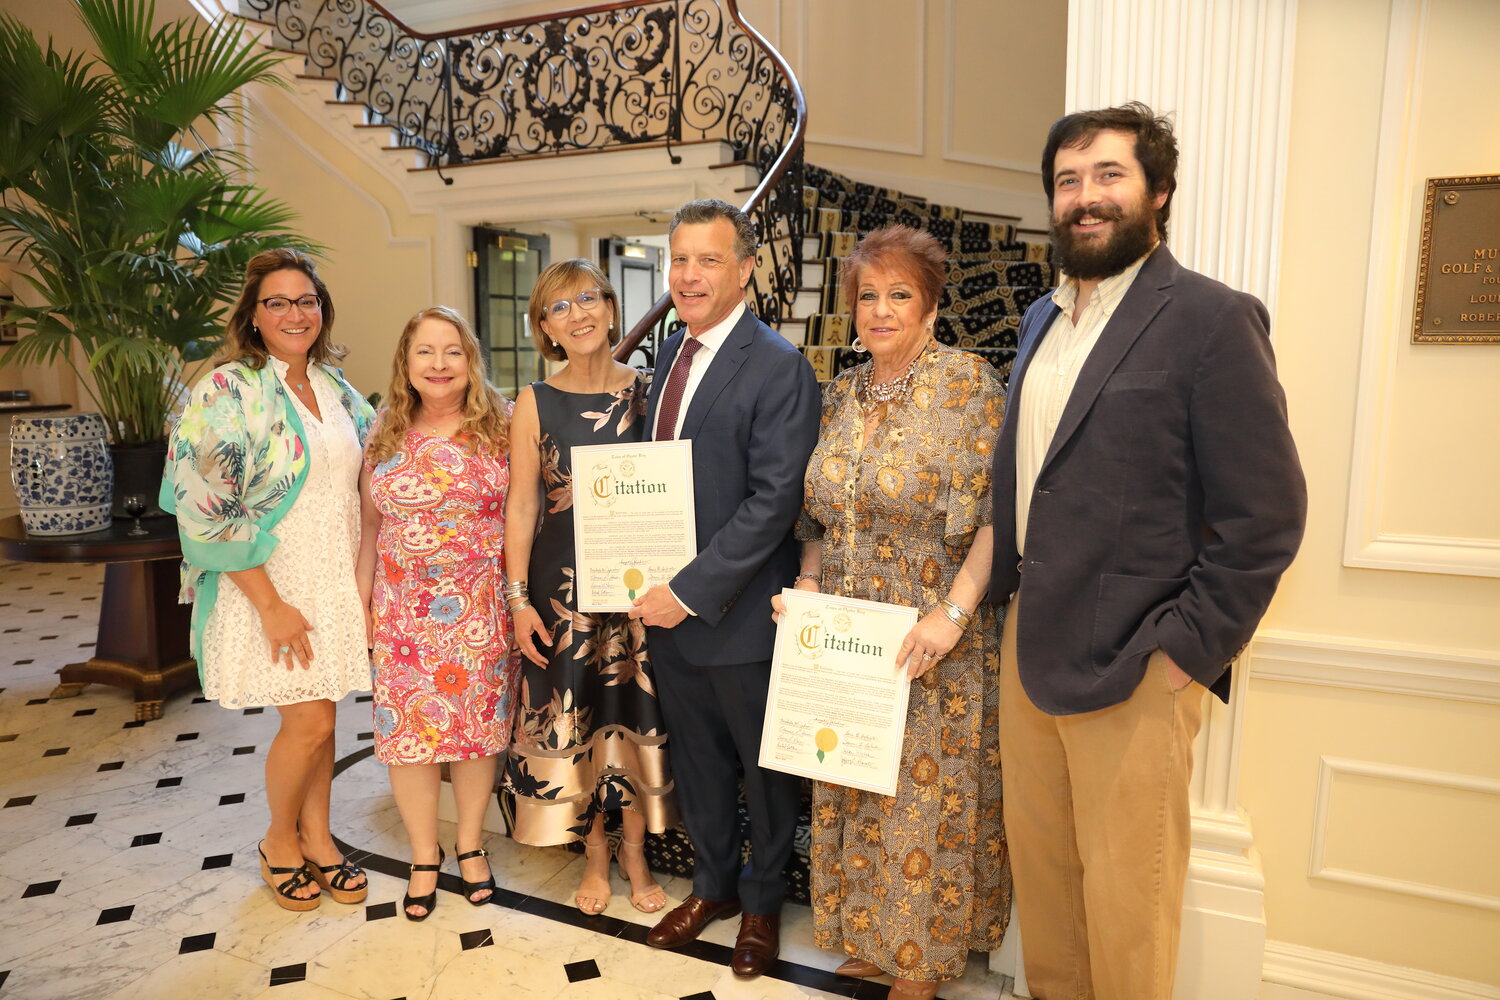 Michele Johnson, Town of Oyster Bay councilwoman far left, honored Laura Lane, Herald senior editor, Nancy and Stuart Richner, Herald publisher, Iris Picone, operations manager, Anton Community Newspapers, and Will Sheeline, reporter for the Herald, for their efforts in community journalism at Raynham Hall’s annual Love Re-Awakened Benefit.